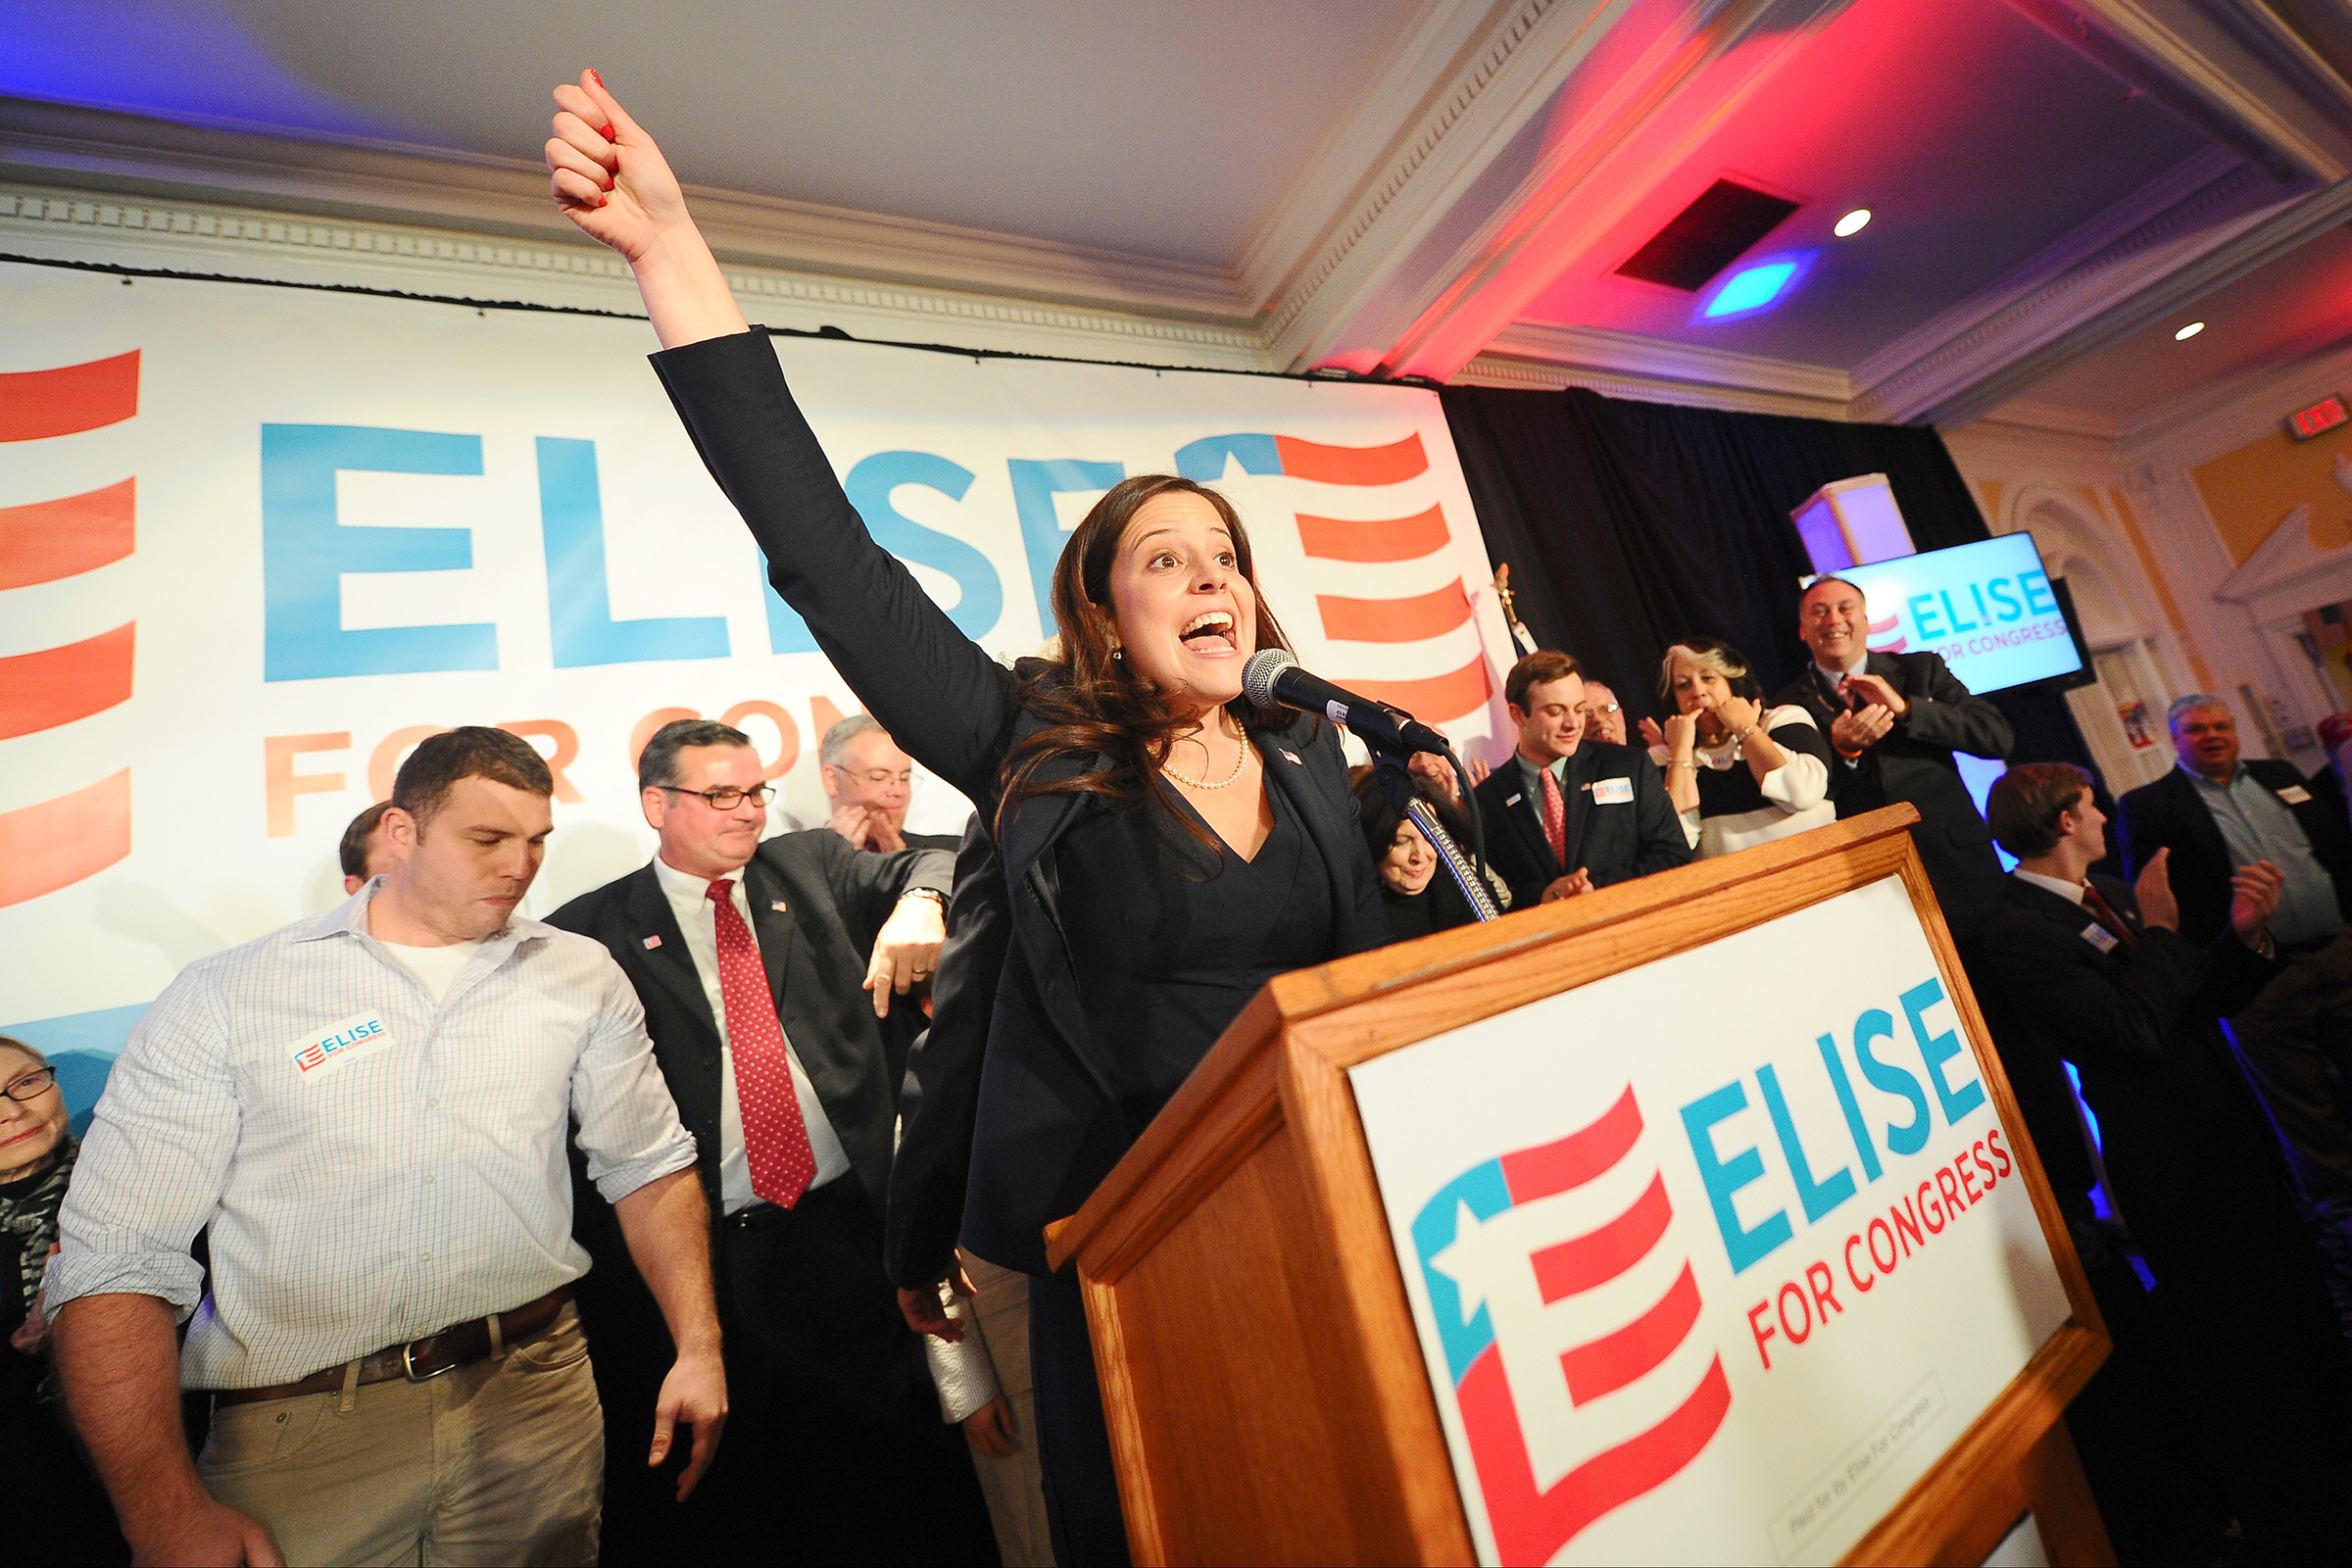 Elise Stefanik celebrates her win in the 21st Congressional district on election night at the Queensbury Hotel in Glens Falls, N.Y., on Nov. 4, 2014. (Steve Jacobs—The Post-Star/AP)